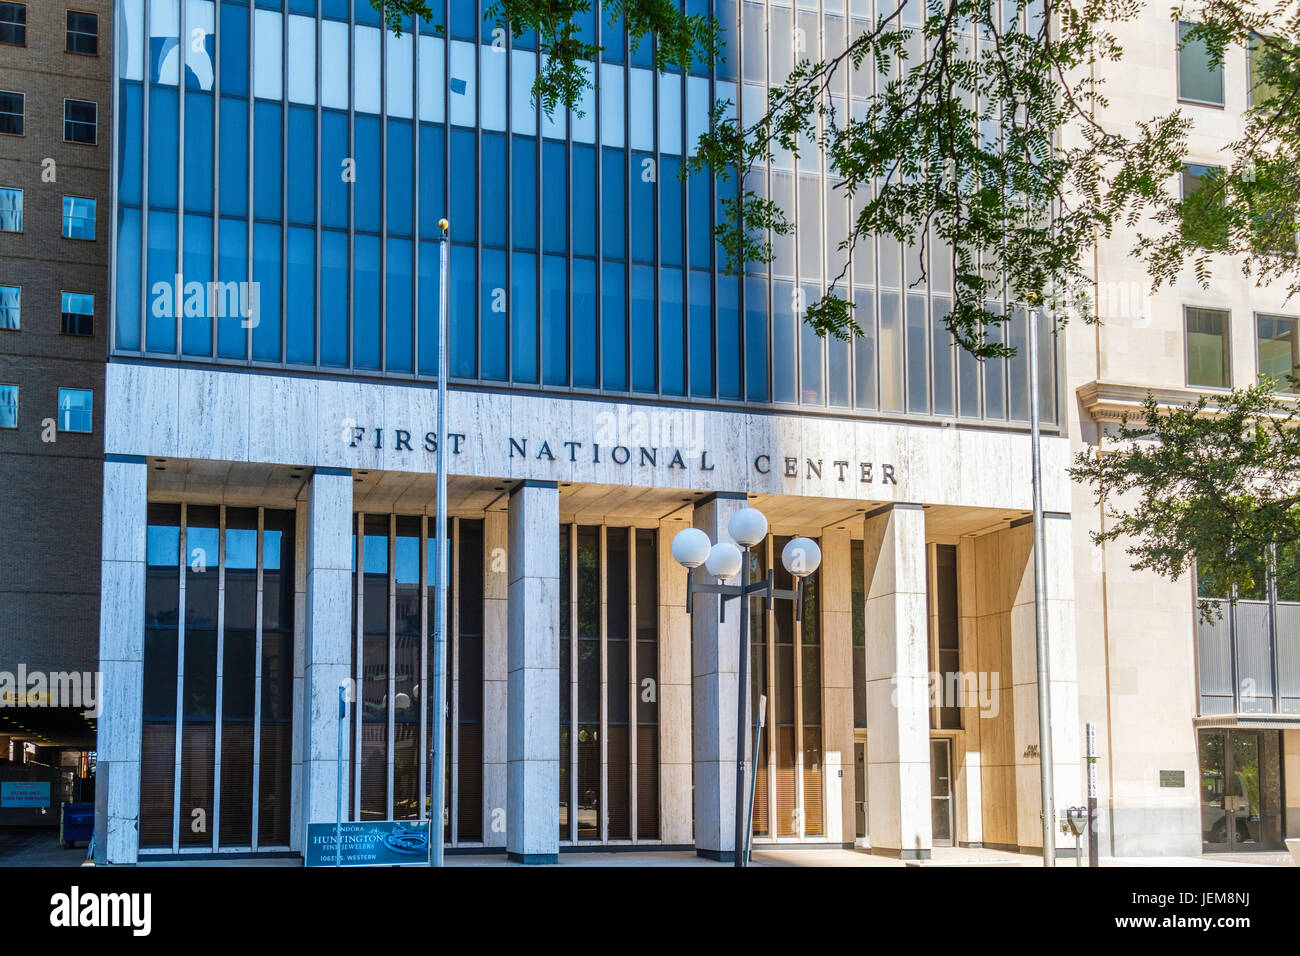 First National Center, a part of a complex including First National Bank Building in Oklahoma City, Oklahoma, USA. Stock Photo